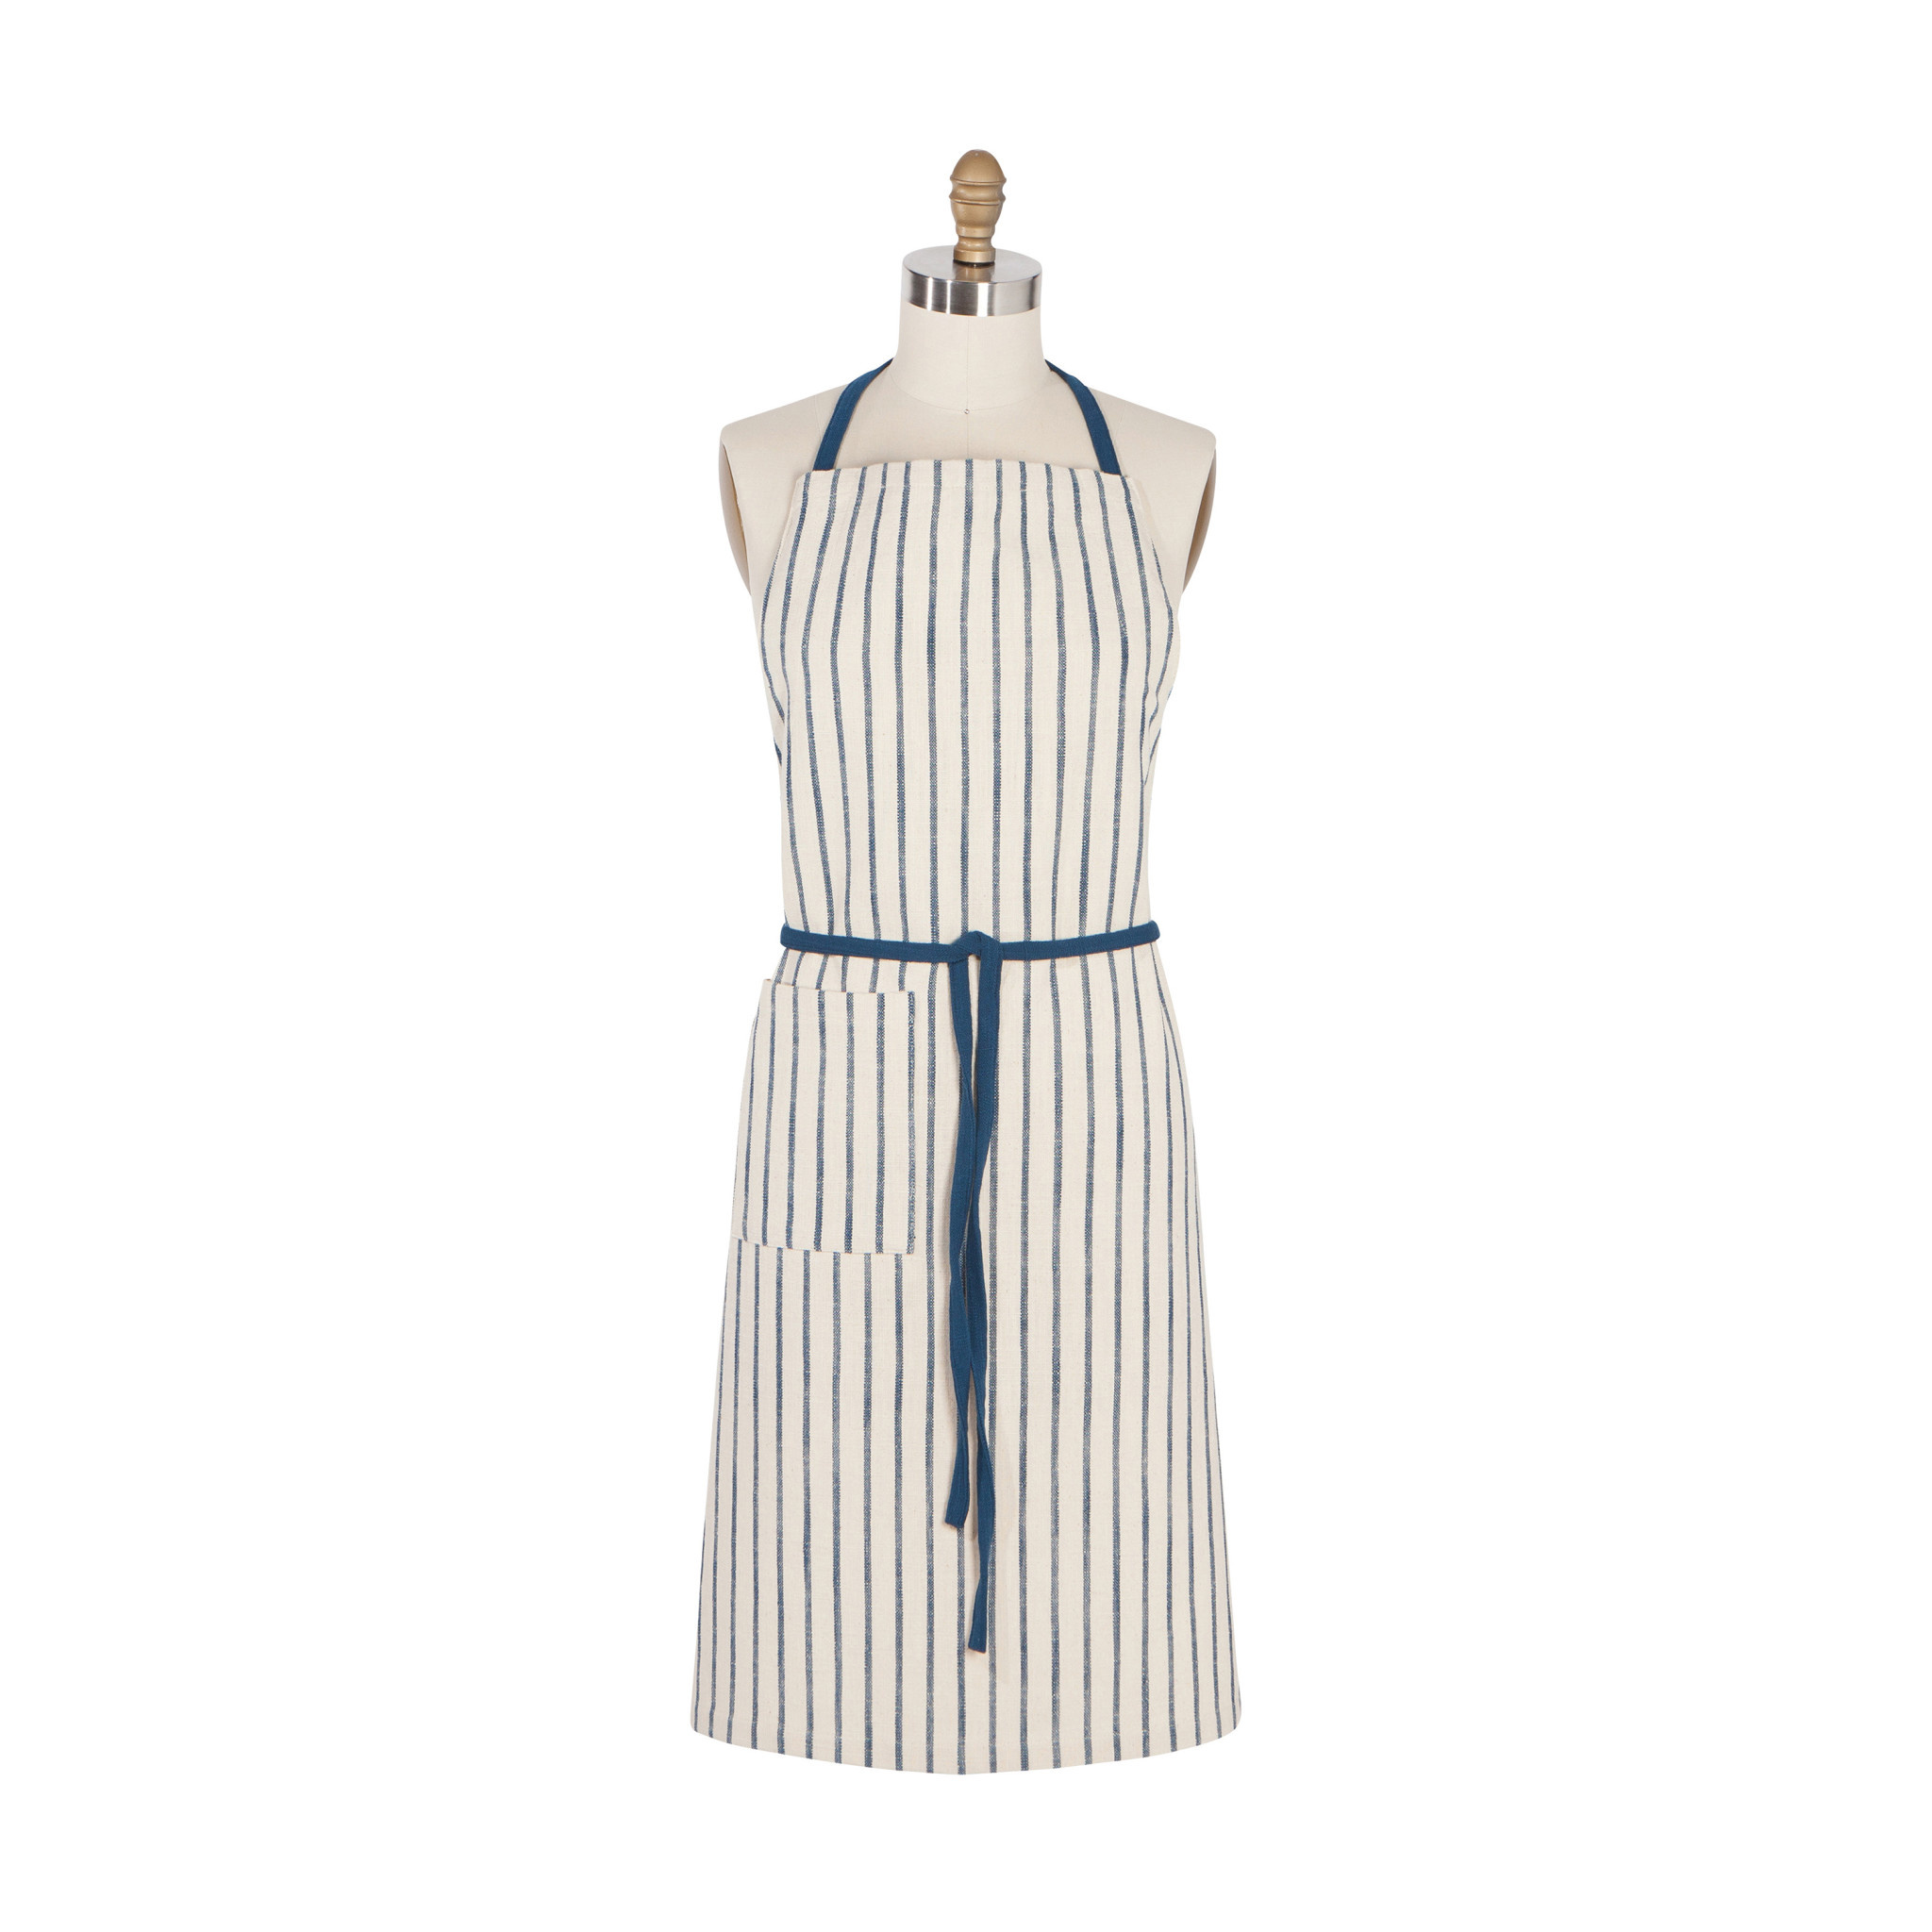 apron, camille vintage french - Whisk